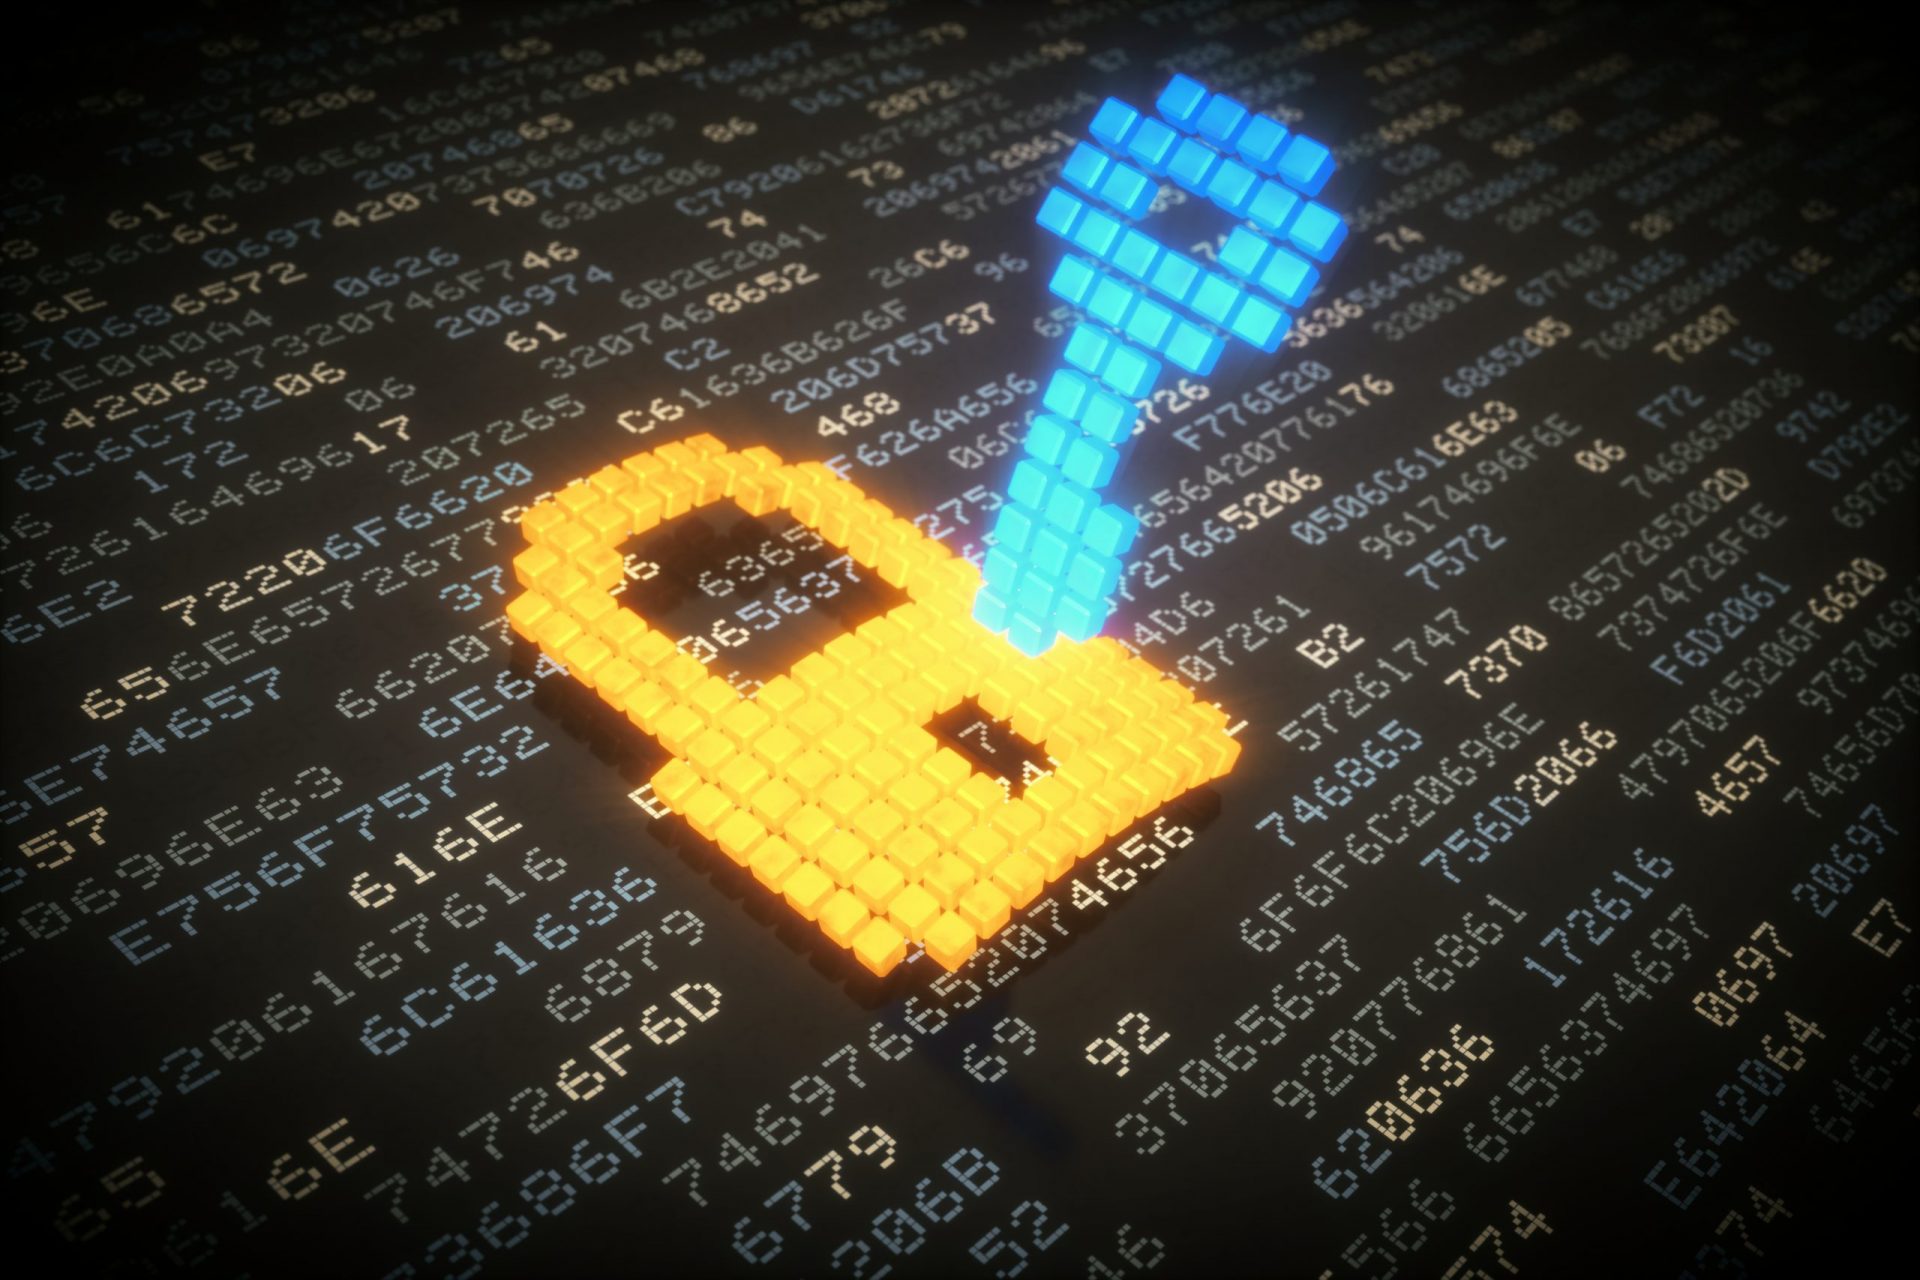 Abstract IT concept image showing a glowing pixelated lock and key over encrypted data. A stylized lock and key shapes are made out of glowing pixels (3D cubes) and both are slightly bent (curved). The key is entering the lock from the top down. The scene is placed on a dark surface that shows many rows of encrypted text in hexadecimal code.